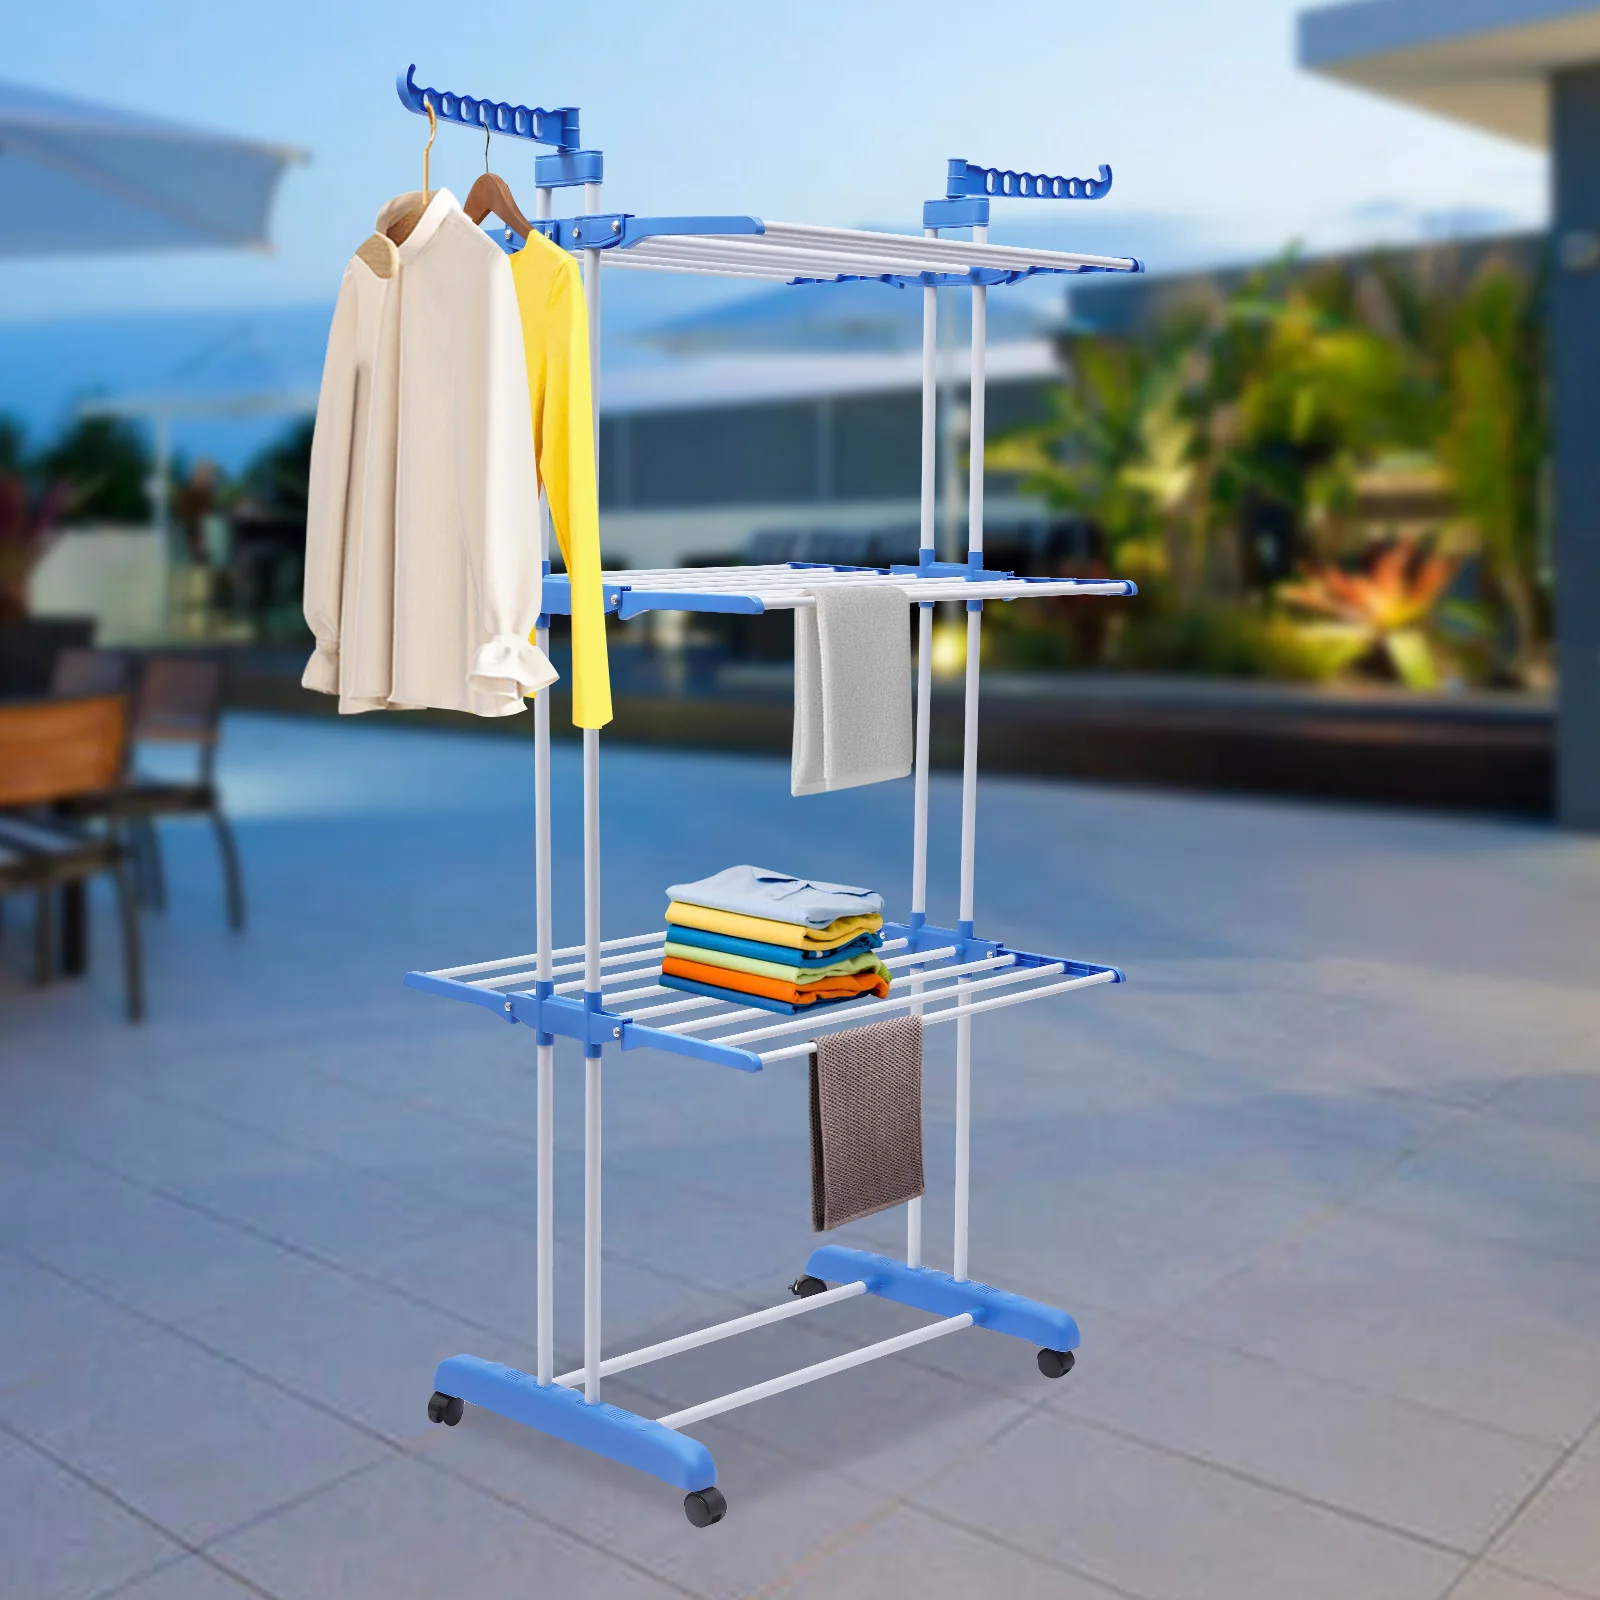 

Modern 4 Tiers Laundry Clothes Drying Rack Folding Garment Rolling Dryer Hanger Heavy Duty Free Stand Laundry Organizer